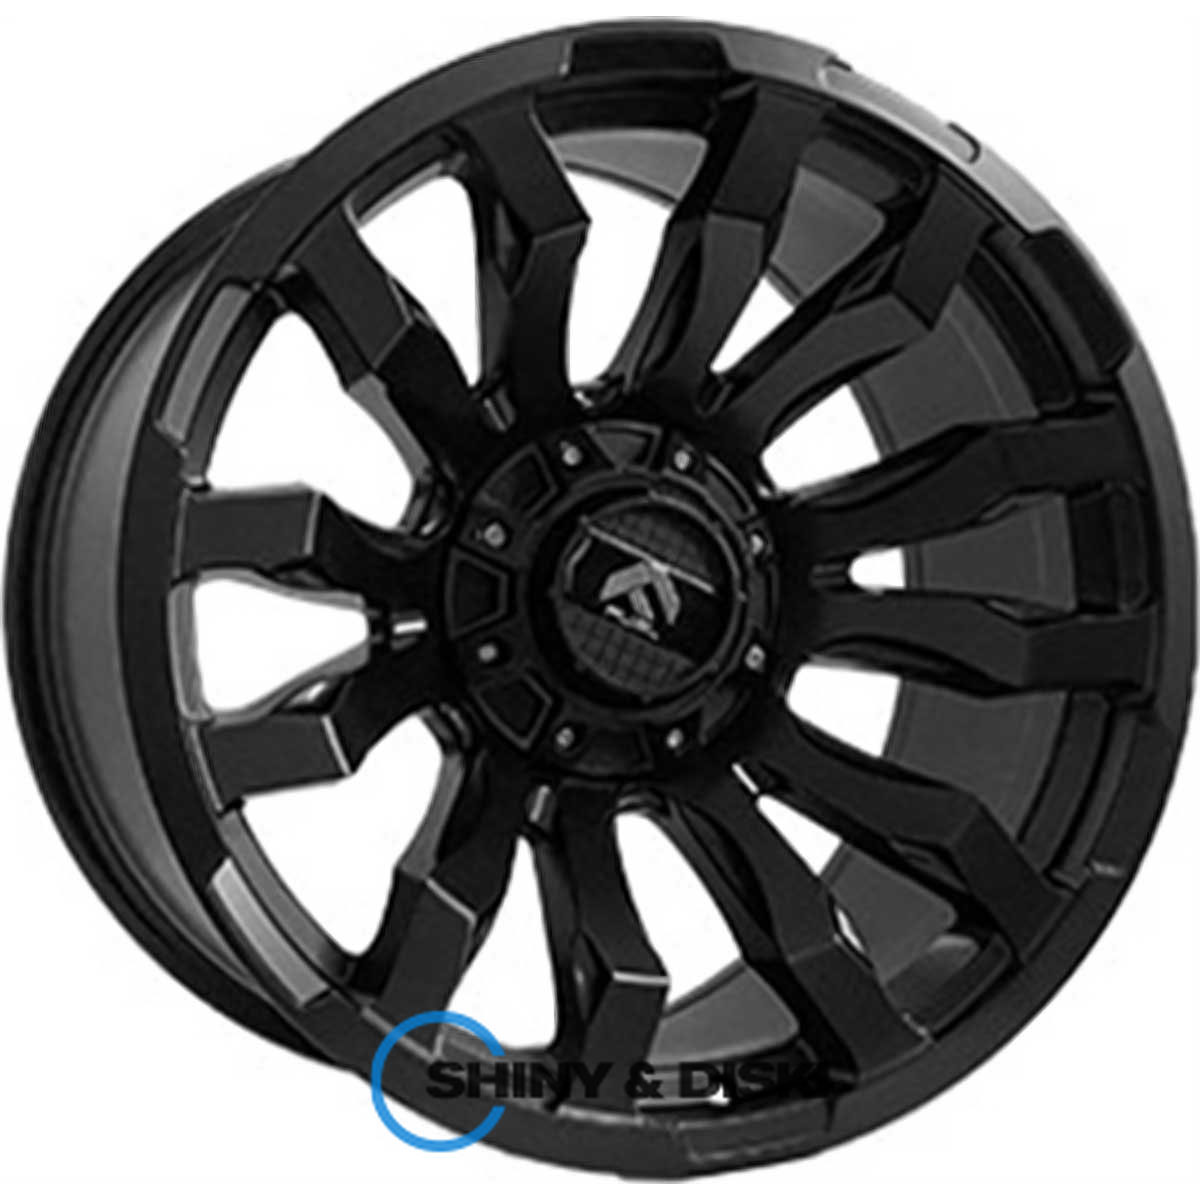 off road wheels ow1588 mb